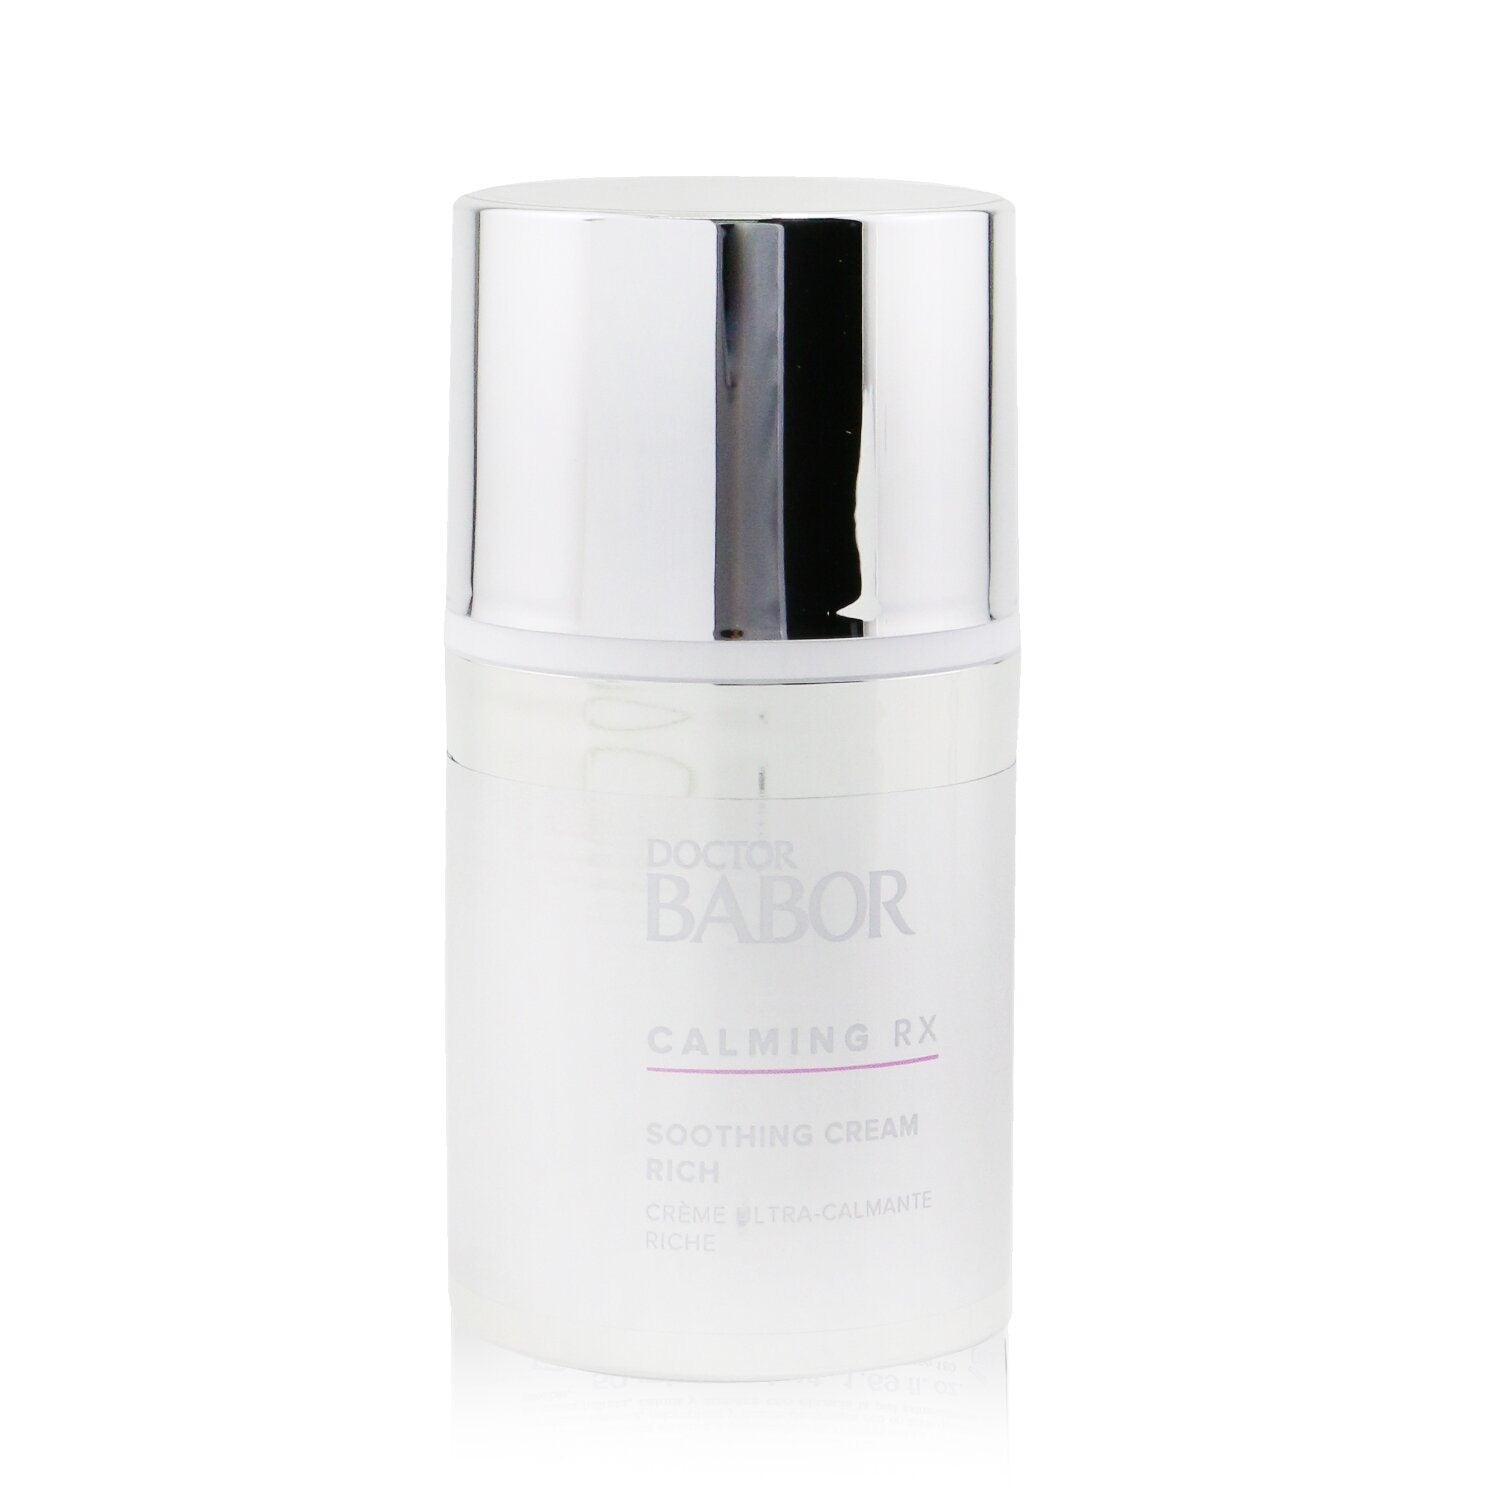 BABOR - Doctor Babor Calming Rx Soothing Cream Rich - 50ml/1.69oz 3P's Inclusive Beauty